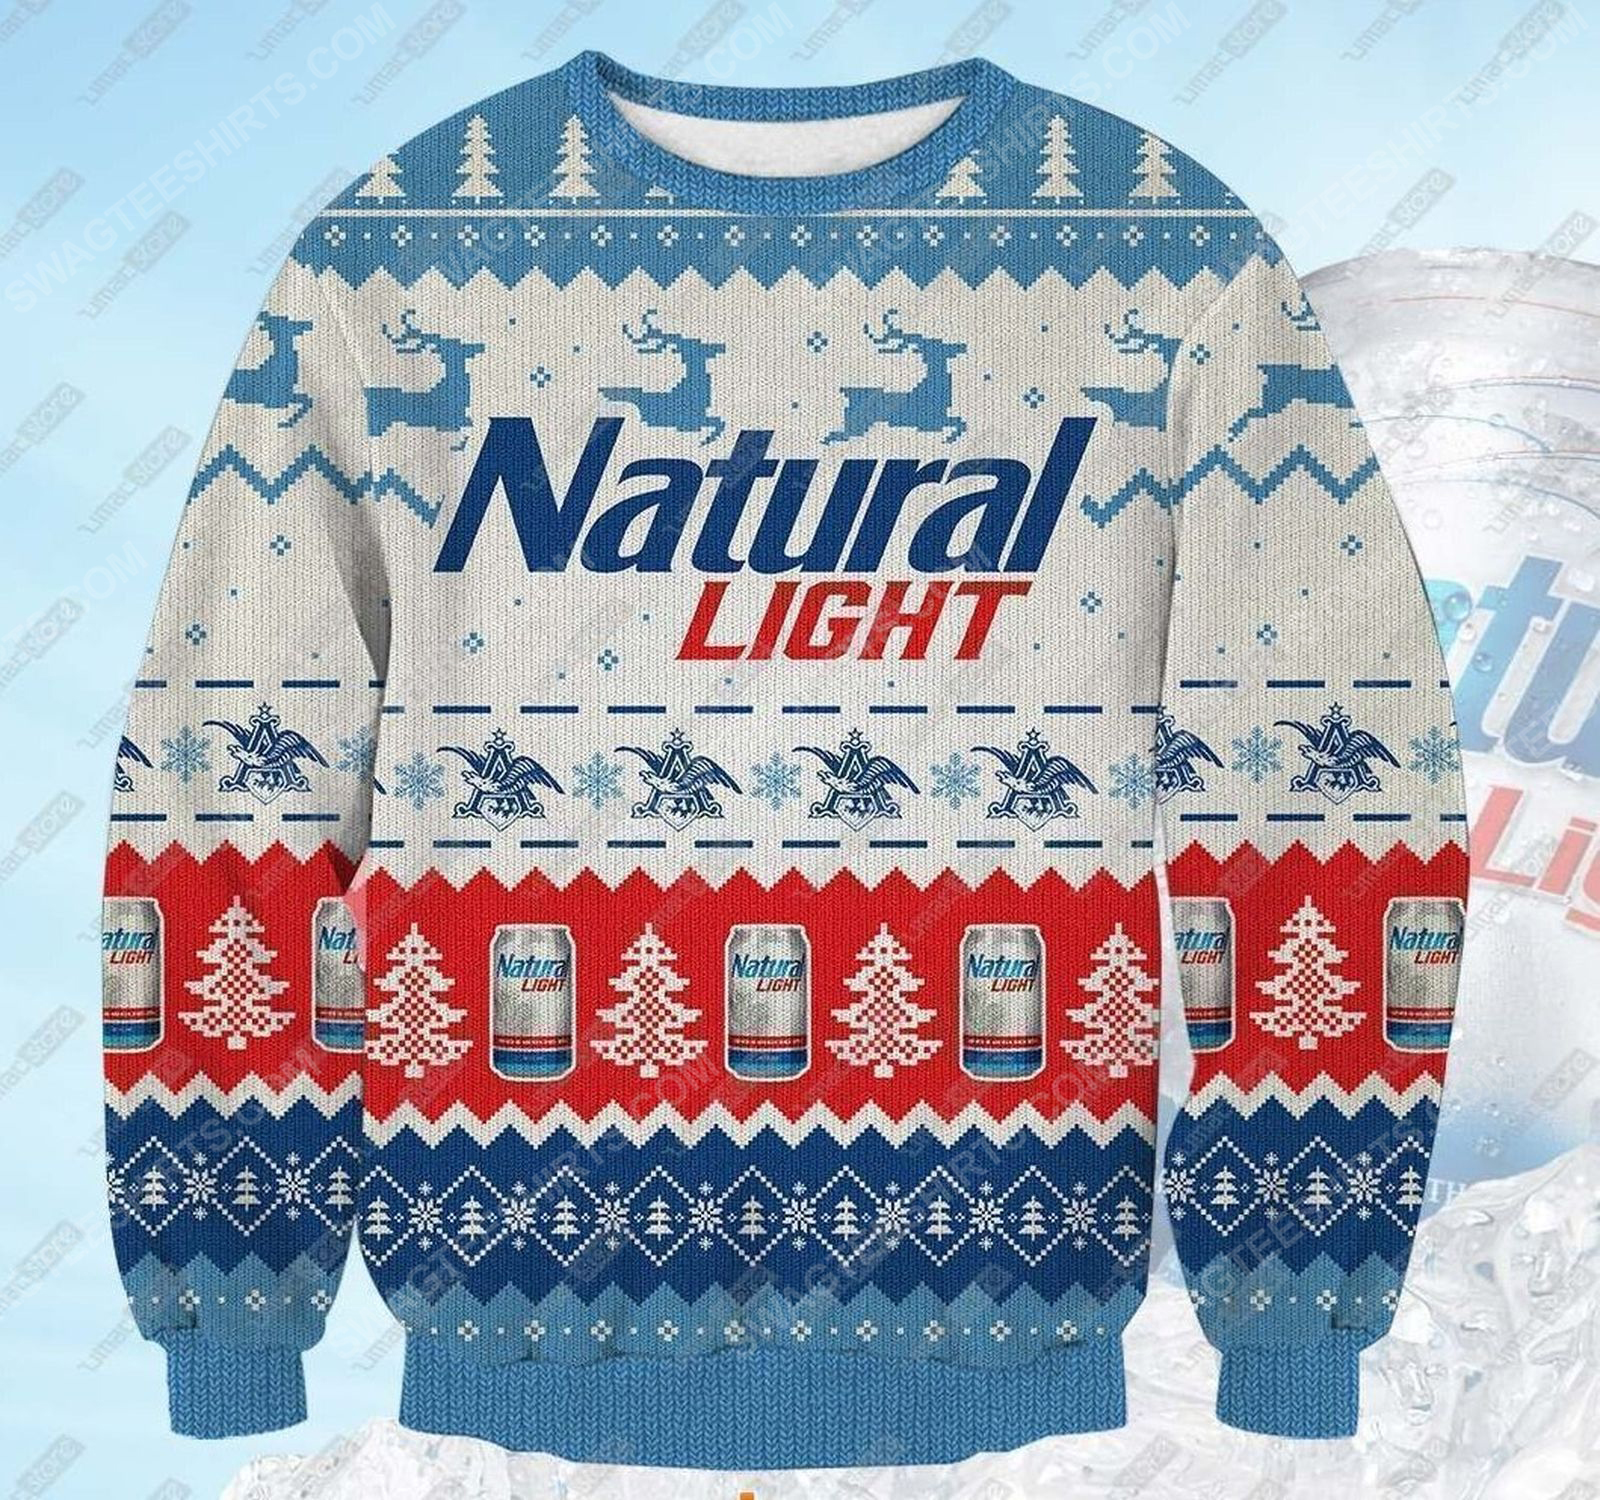 [special edition] Natural light beer ugly christmas sweater – maria